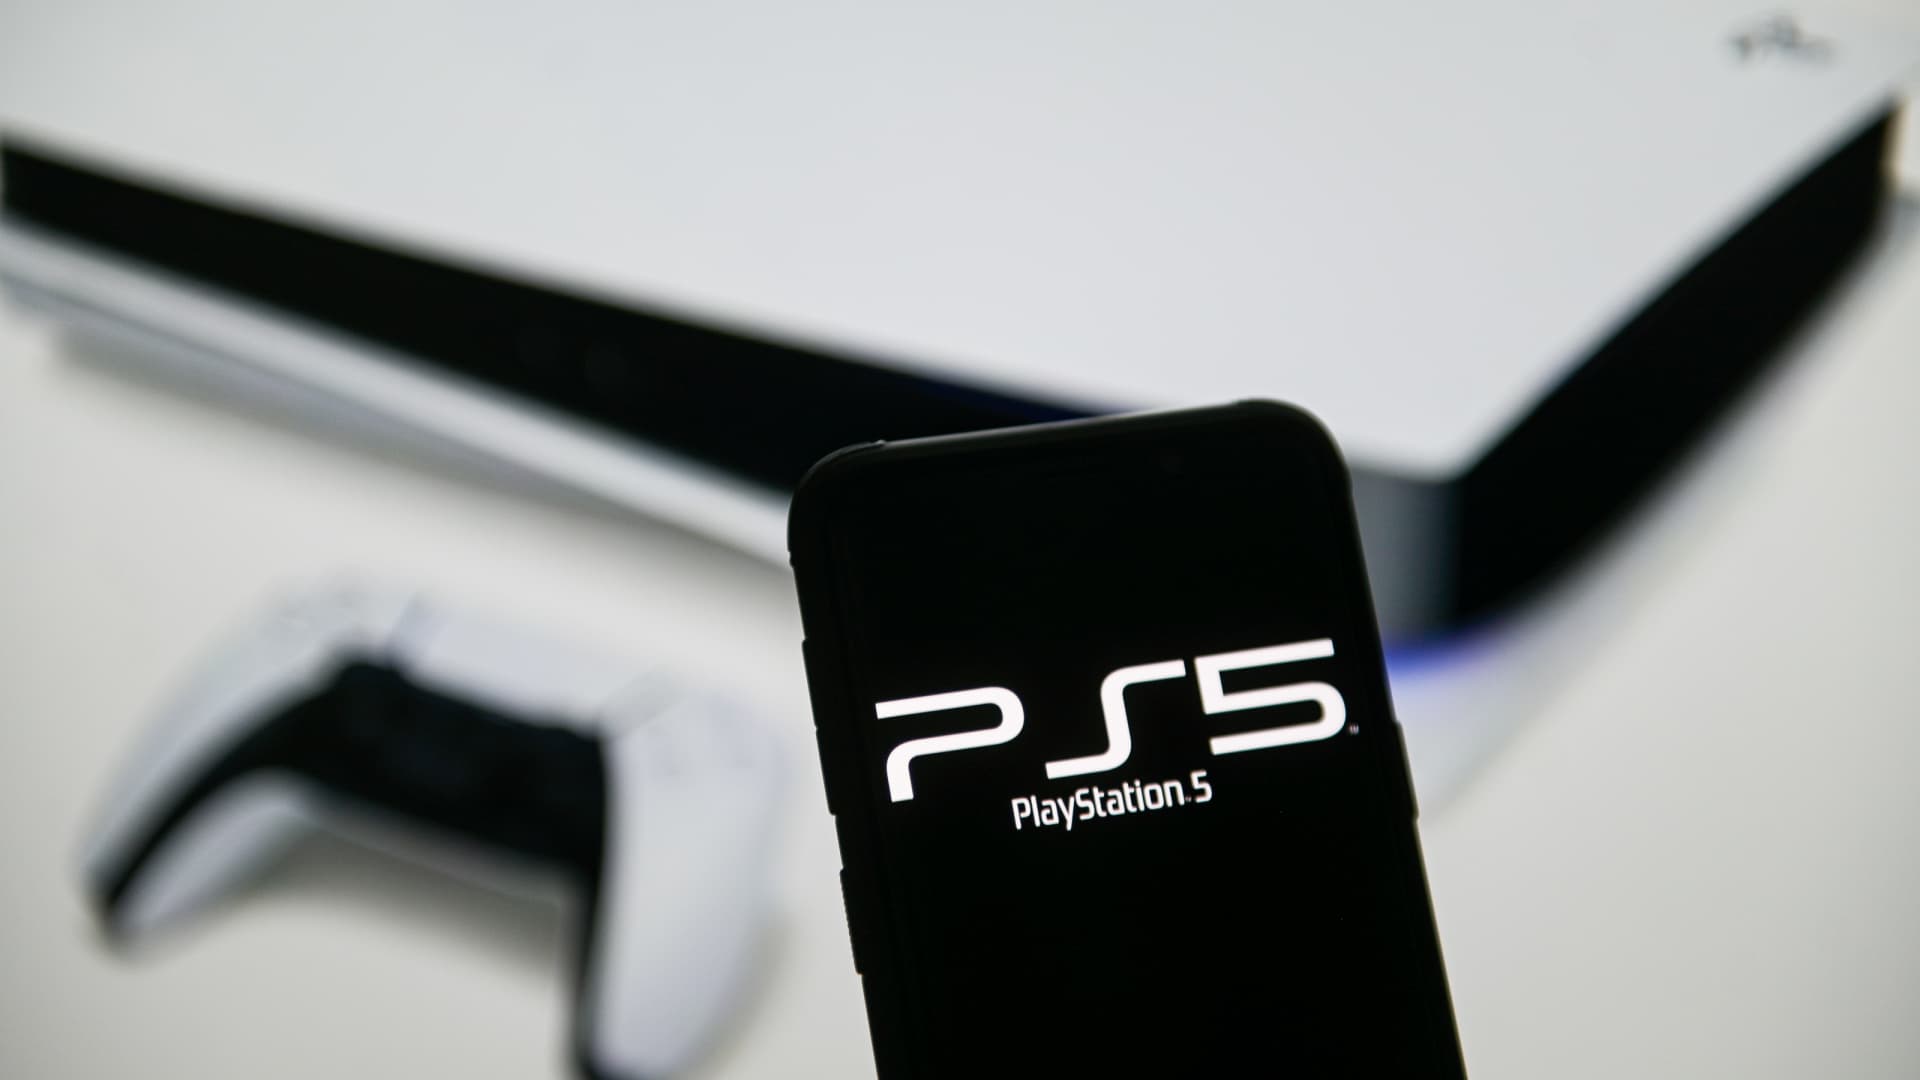 Sony hikes the price of its PlayStation 5 console because of soaring inflation – CNBC